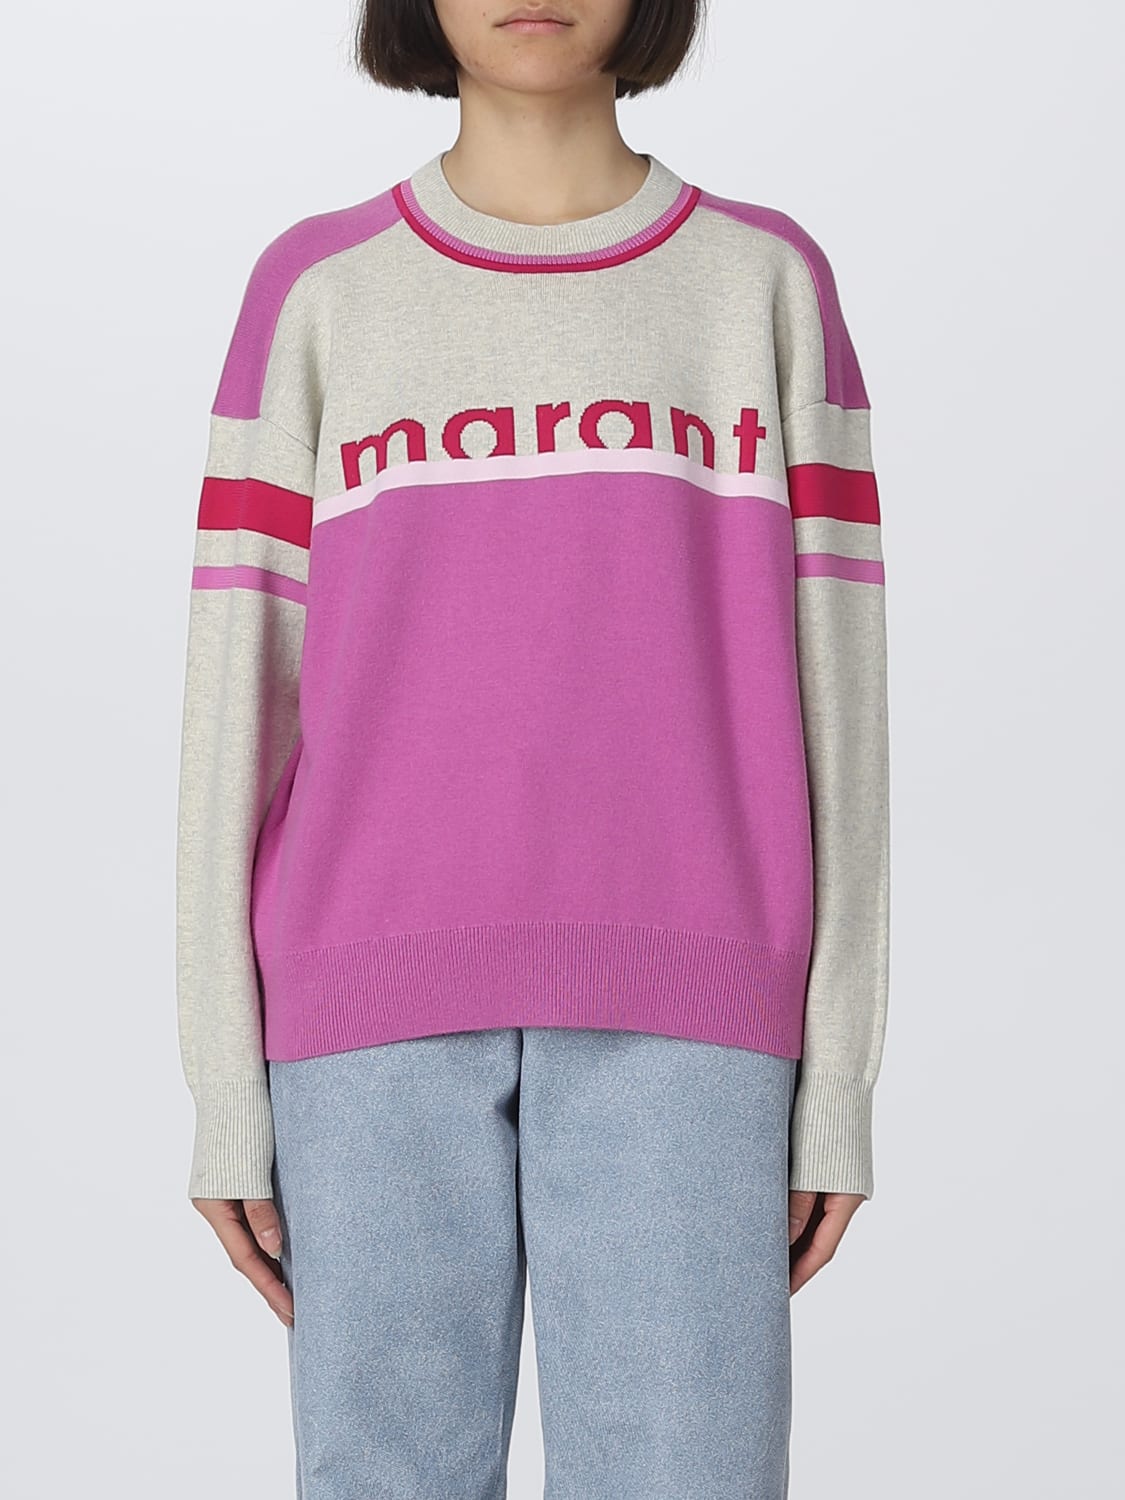 ISABEL MARANT ETOILE: sweater for woman - Pink Isabel Marant Etoile sweater PU0115FAA1L61E online on GIGLIO.COM